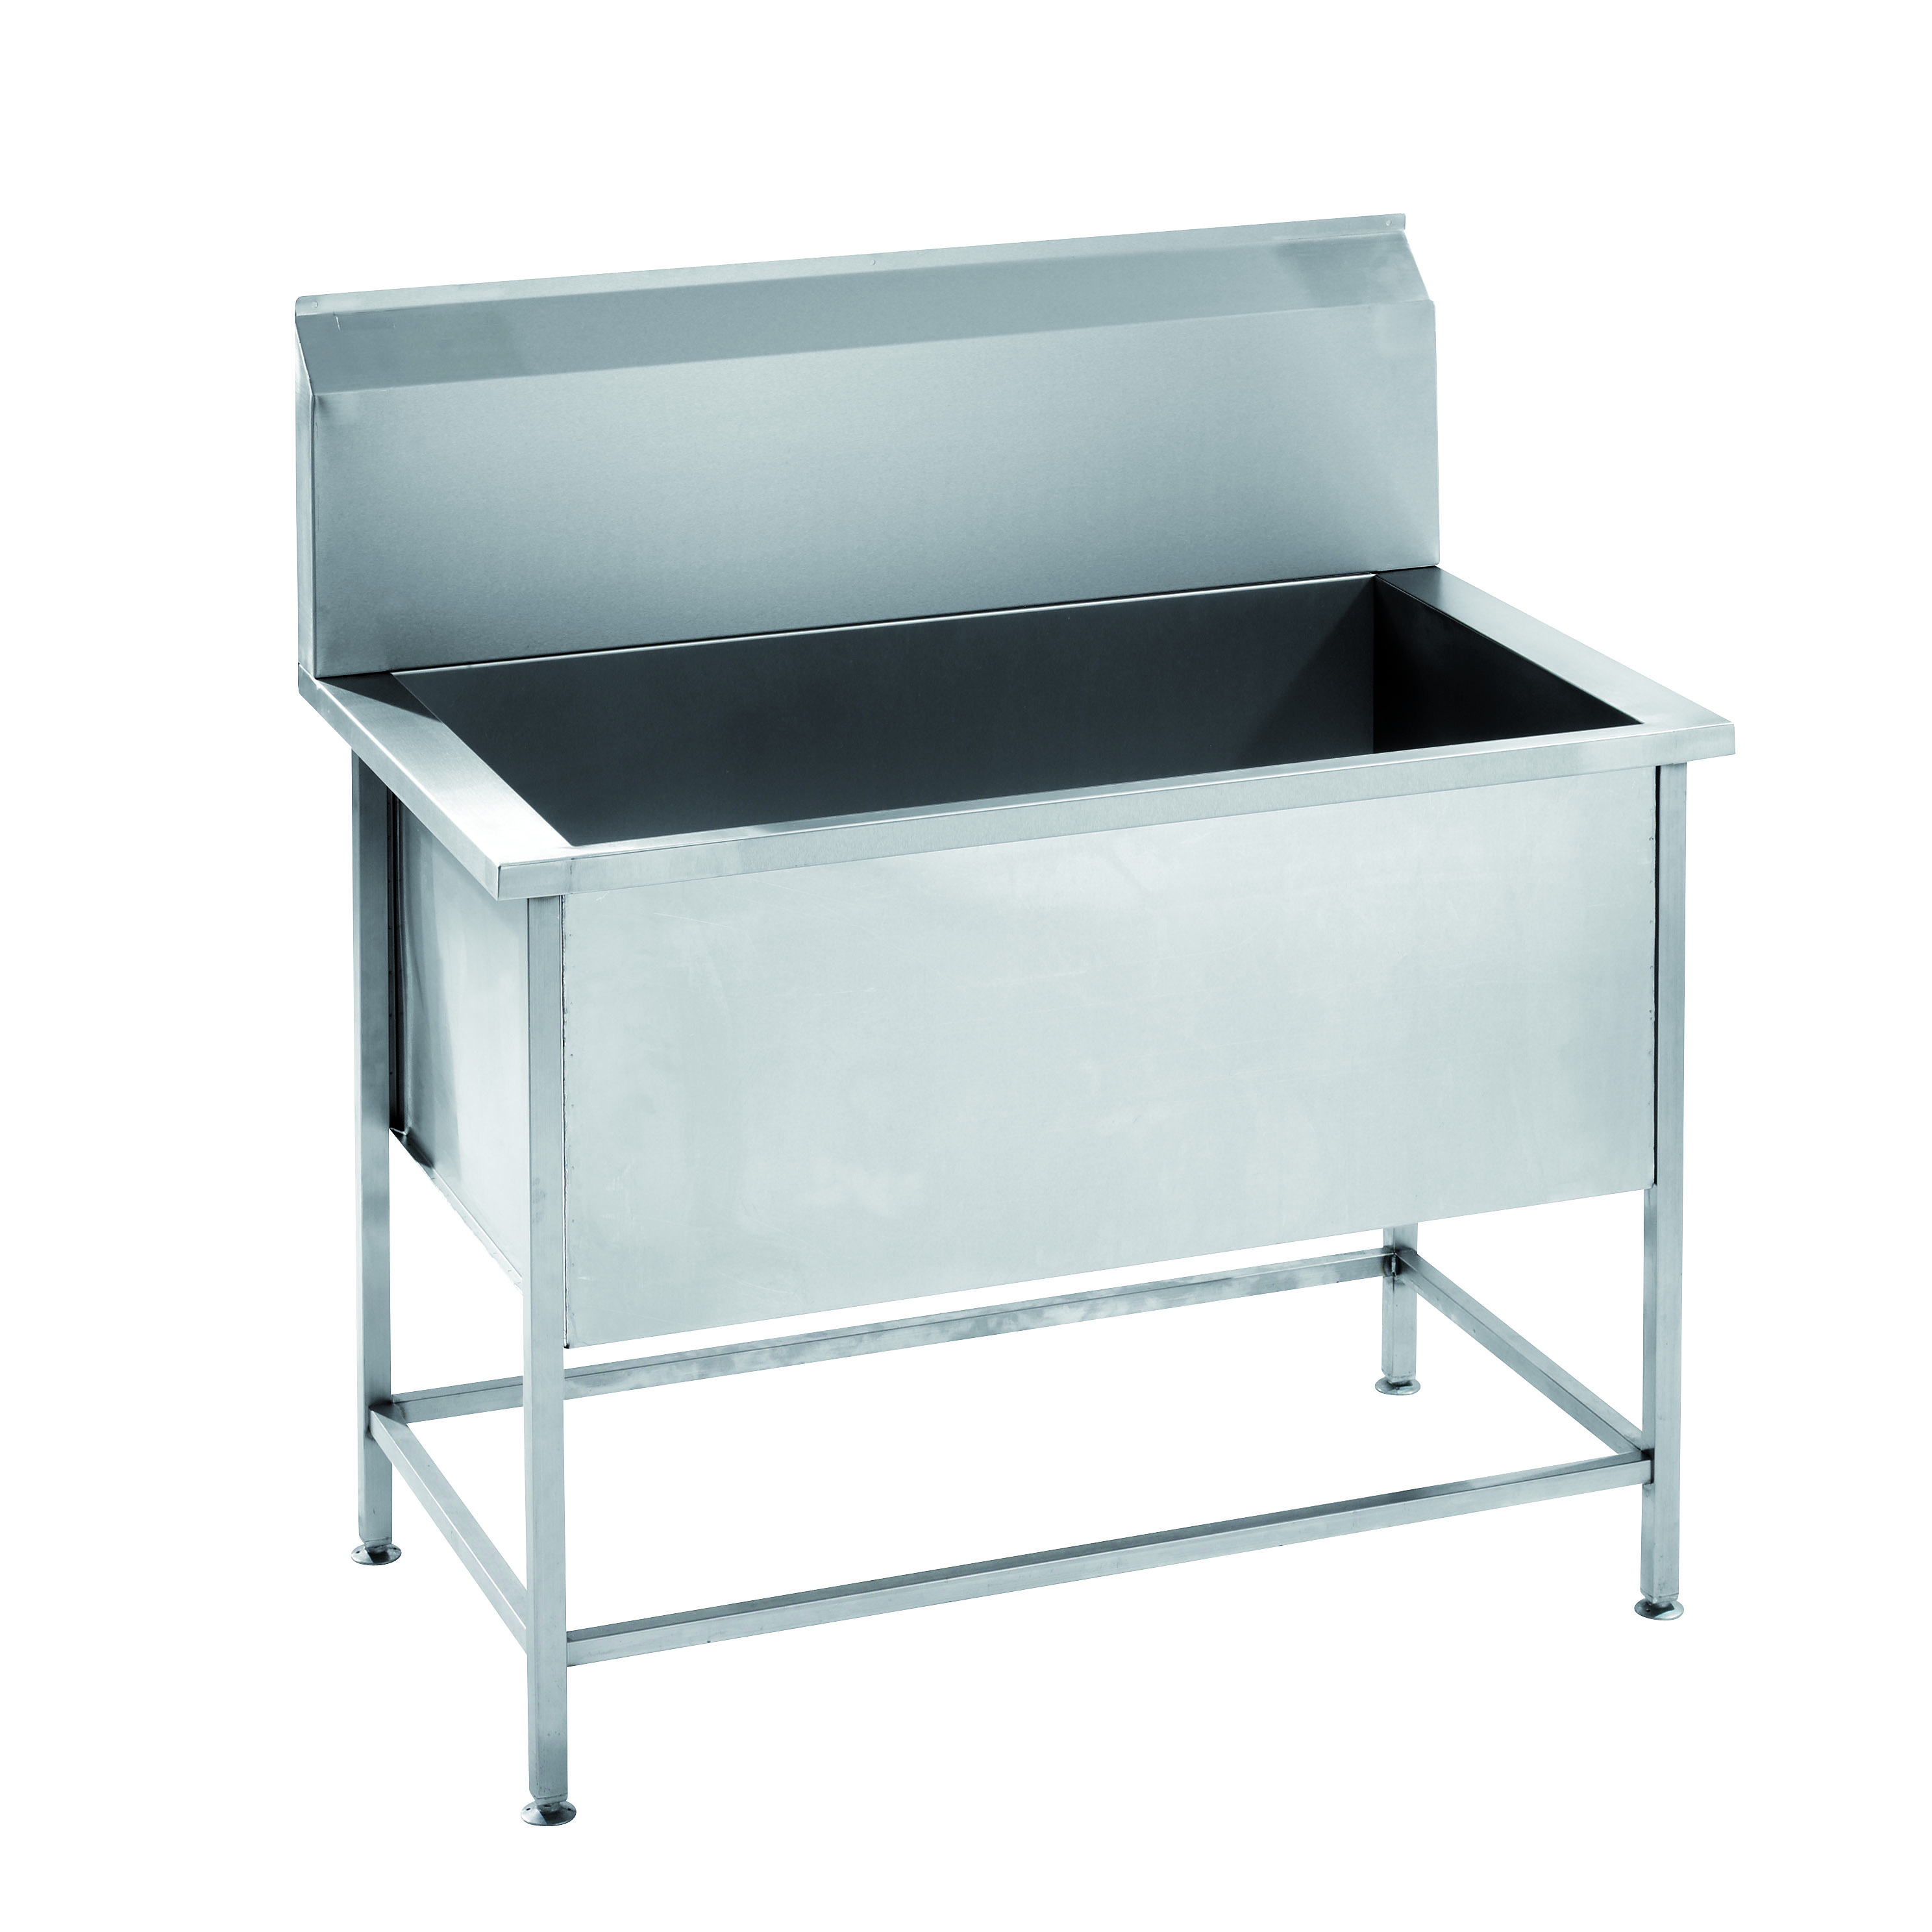 Parry USINK - Stainless Steel Utility Sink